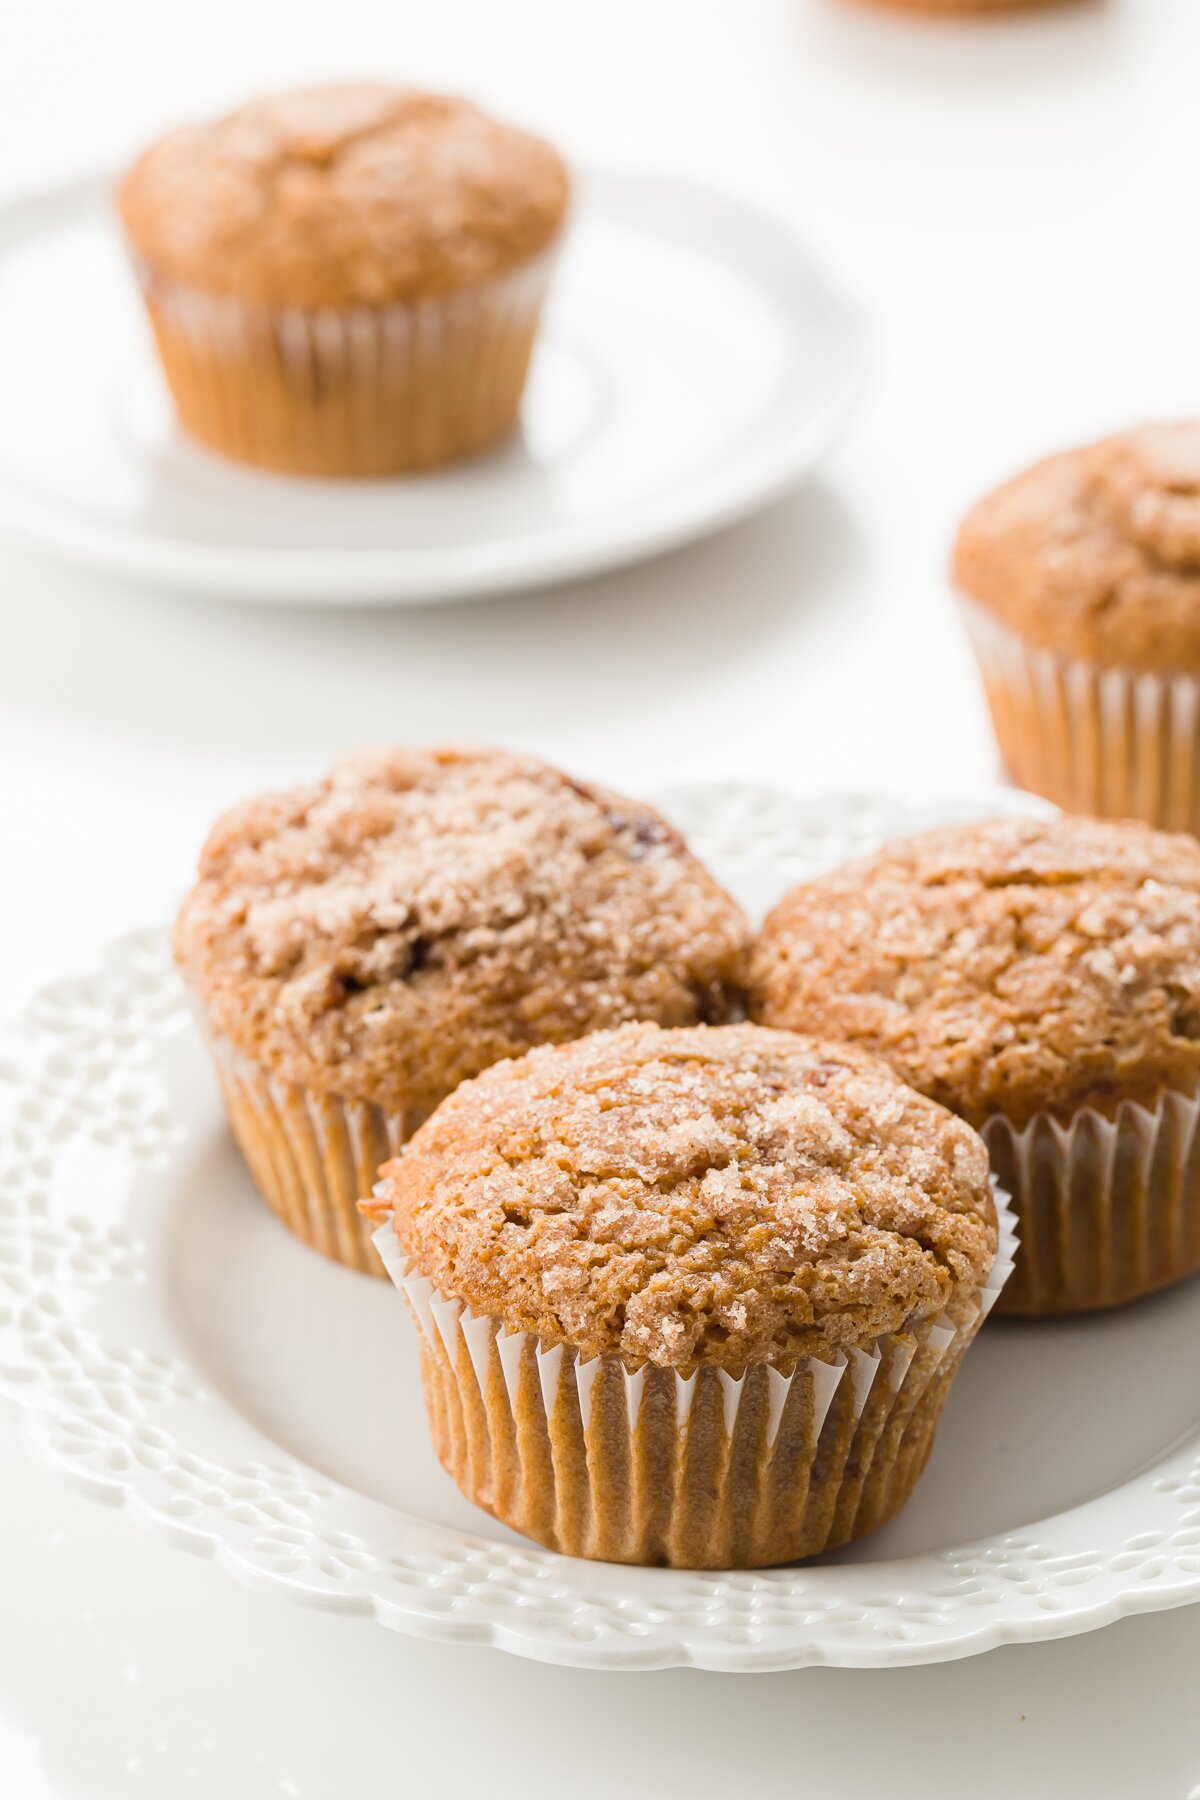 Three cinnamon muffins on a white plate with a muffin in the background